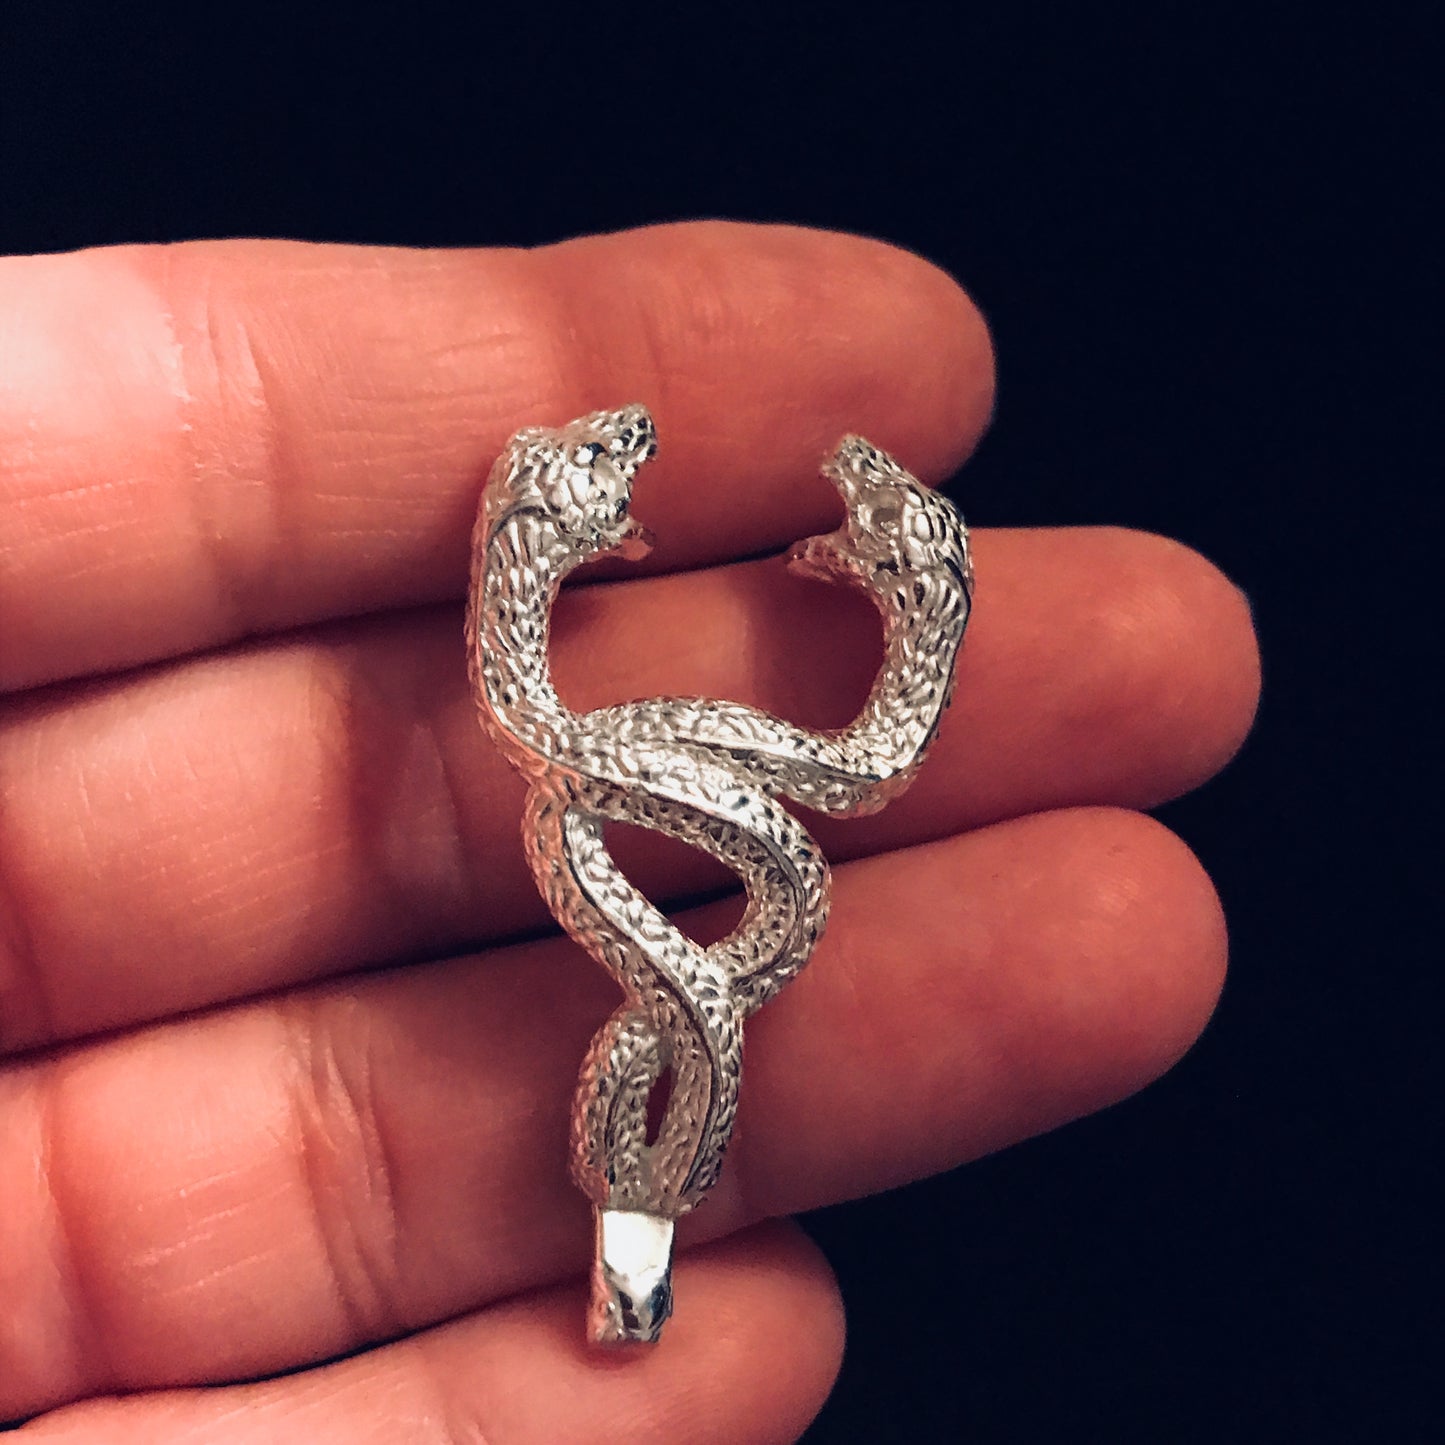 Cast Entwined Snakes for Jewelry Design